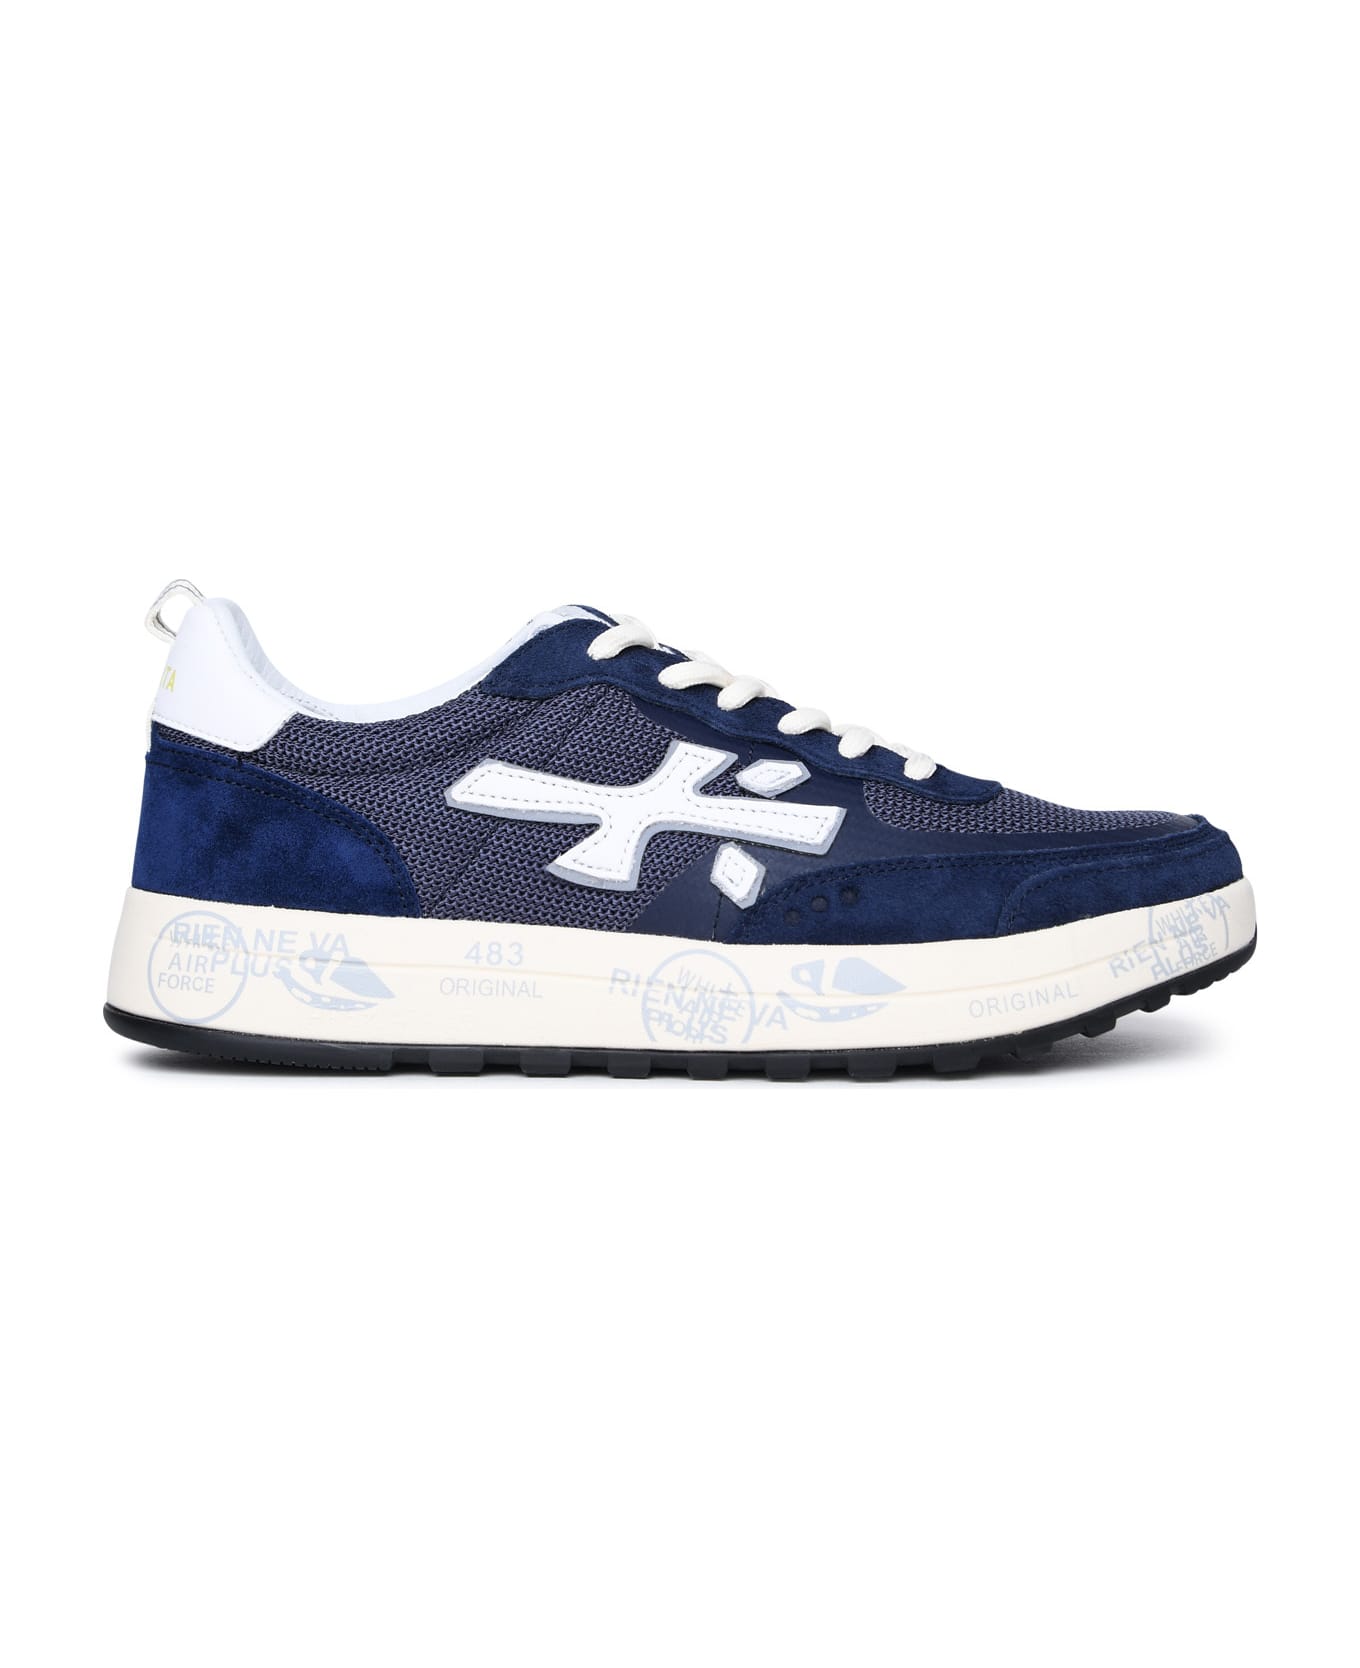 Premiata 'nous' Blue Leather And Fabric Sneakers - Blue スニーカー